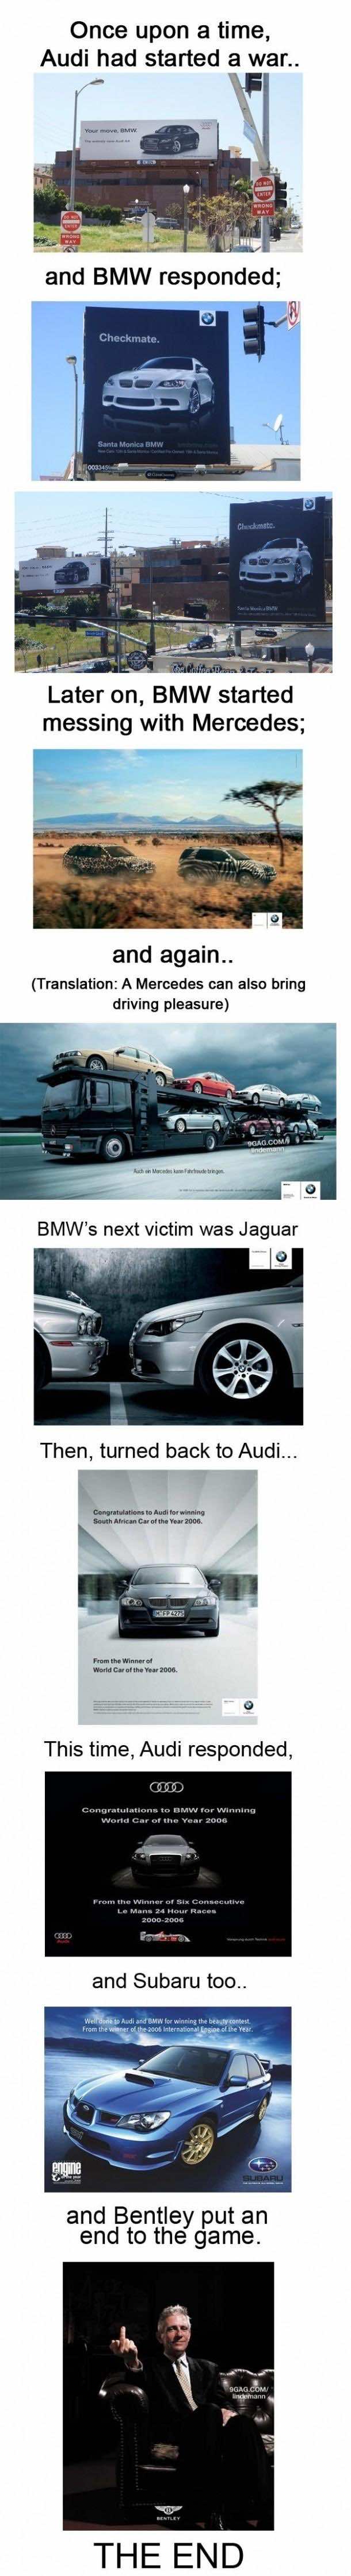 Audi started an ad war, BMW took it everywhere